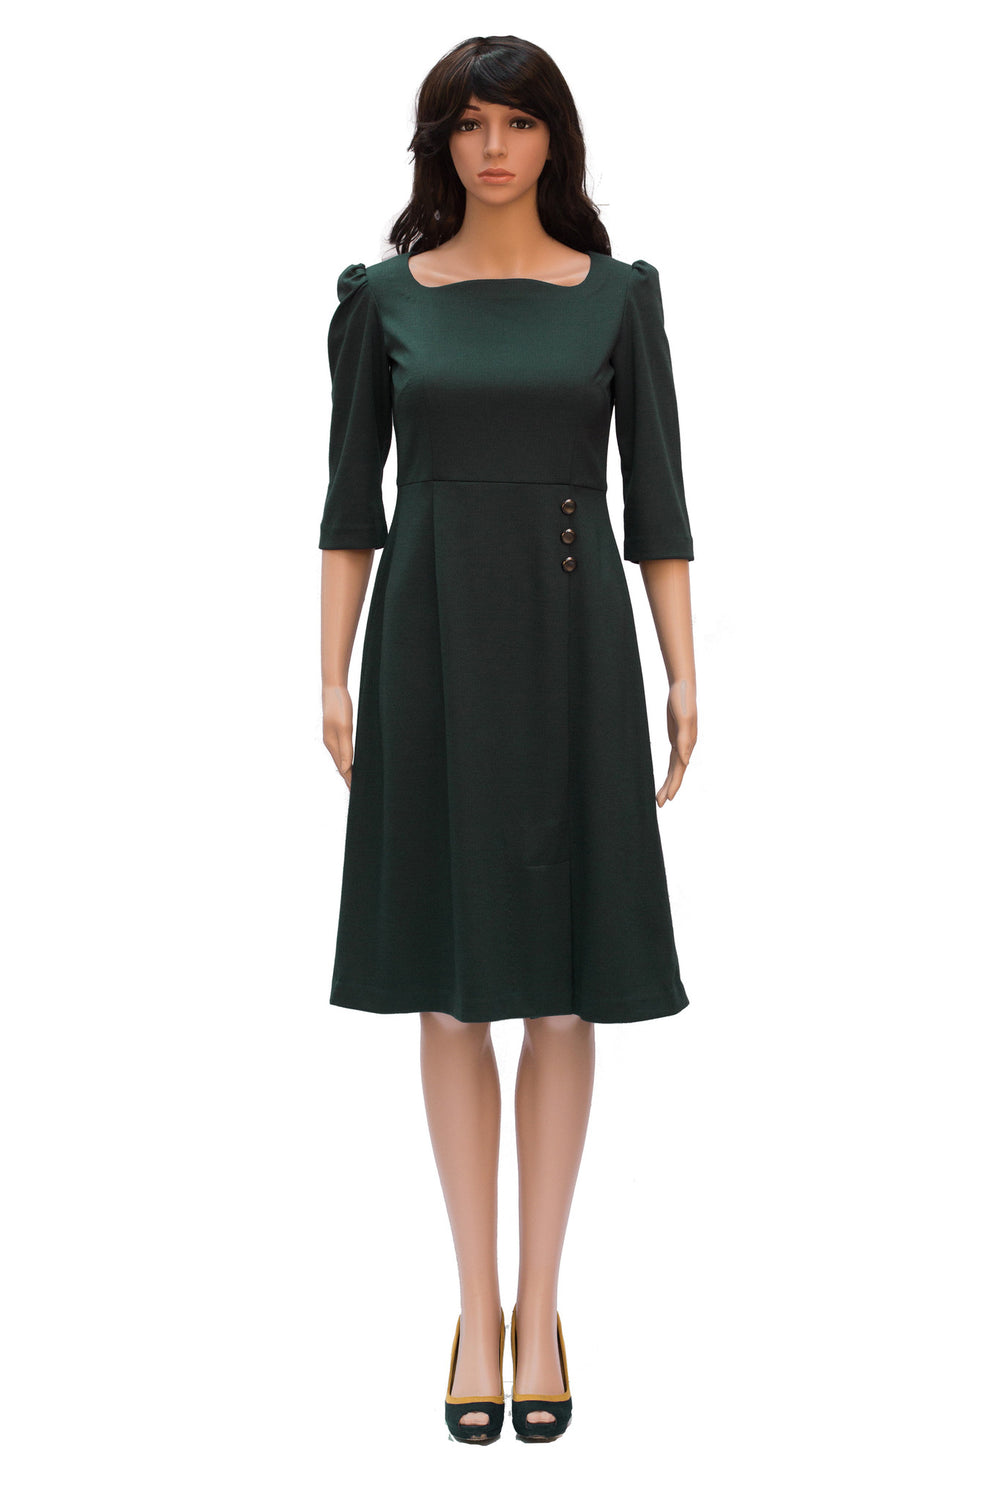 Formal apparel: Knee length green dress with three fourth sleeves and slit in knee